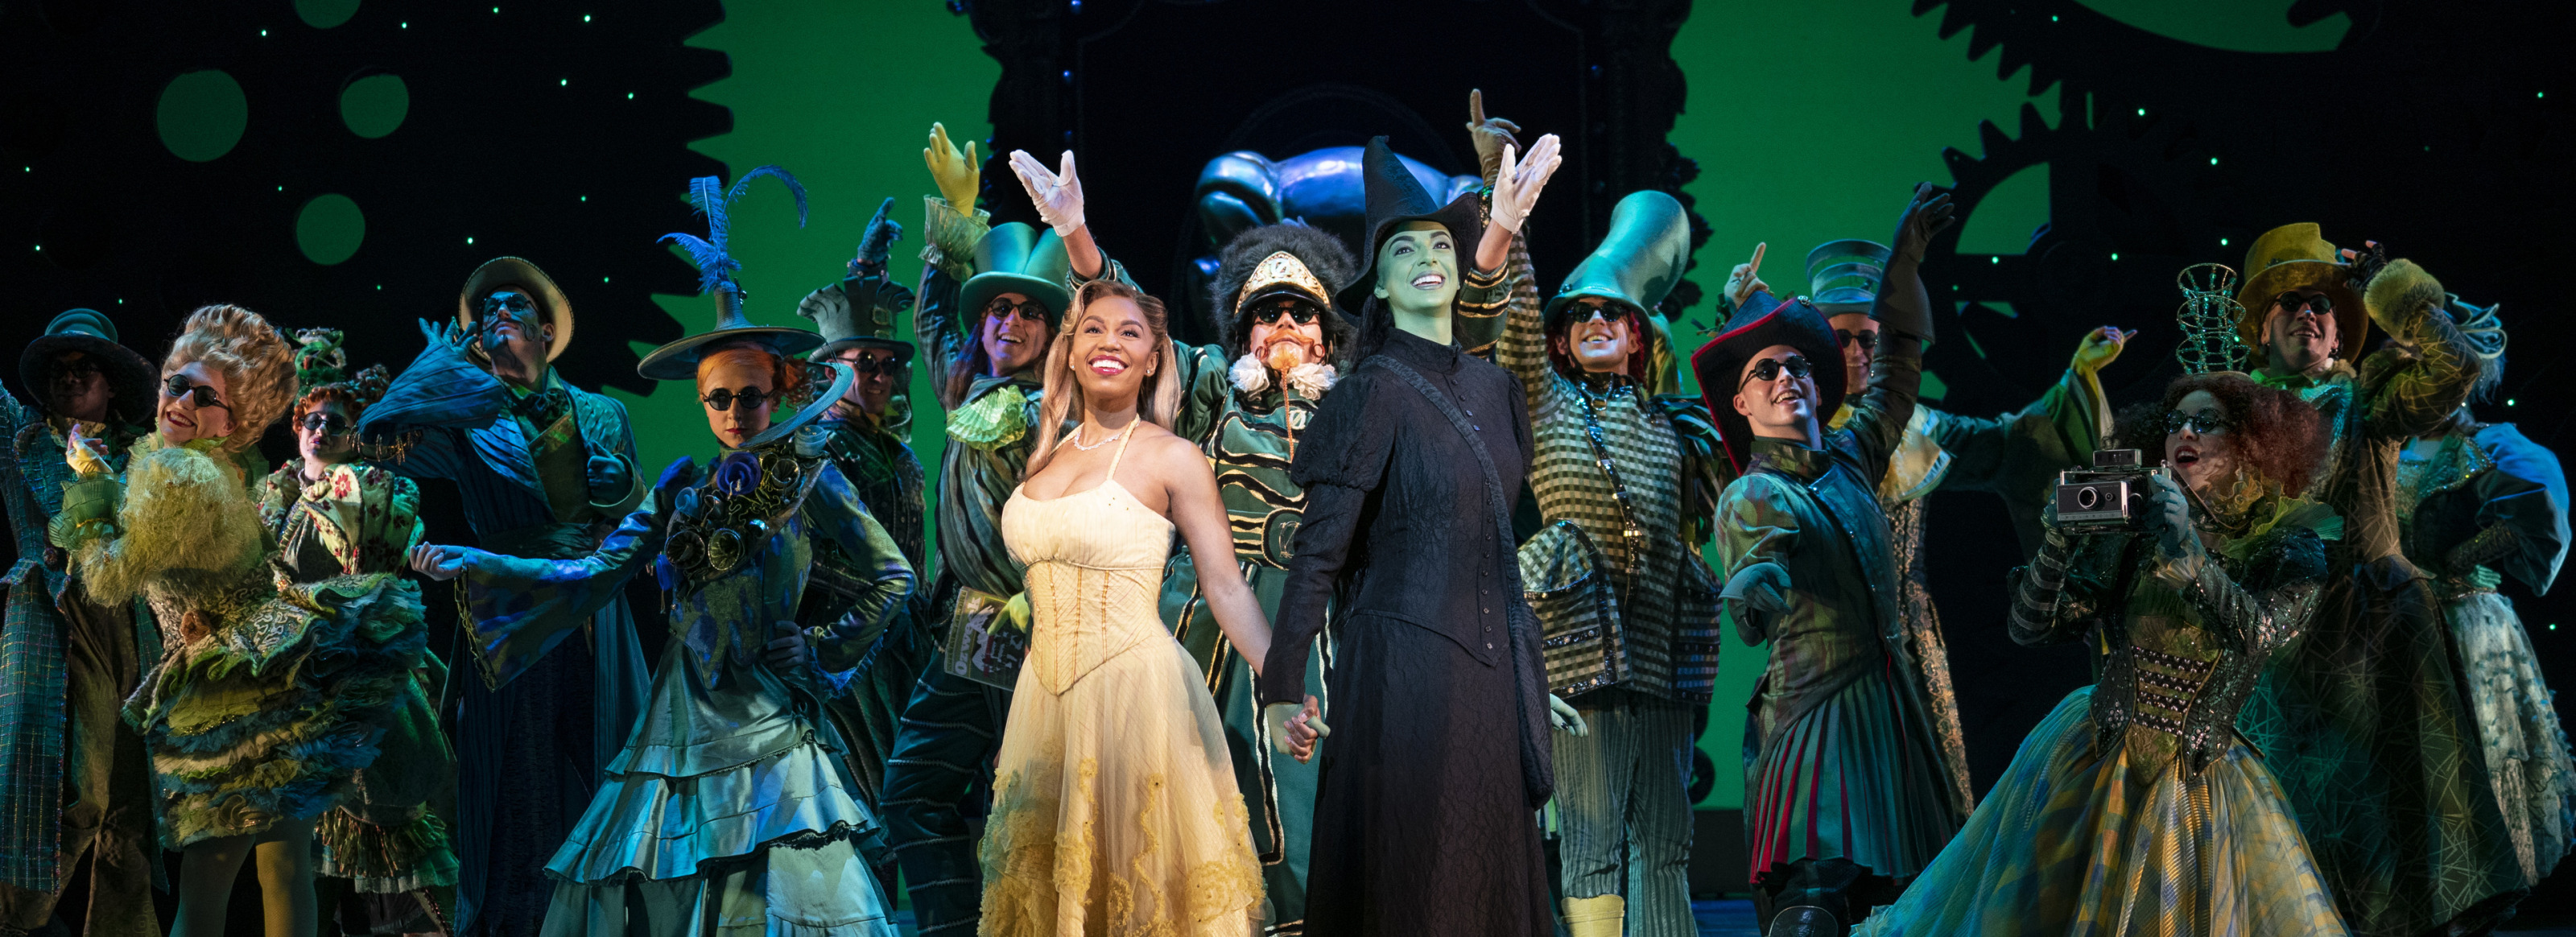 The entire cast of Wicked, the Broadway Musical, singing towards the audience during performance